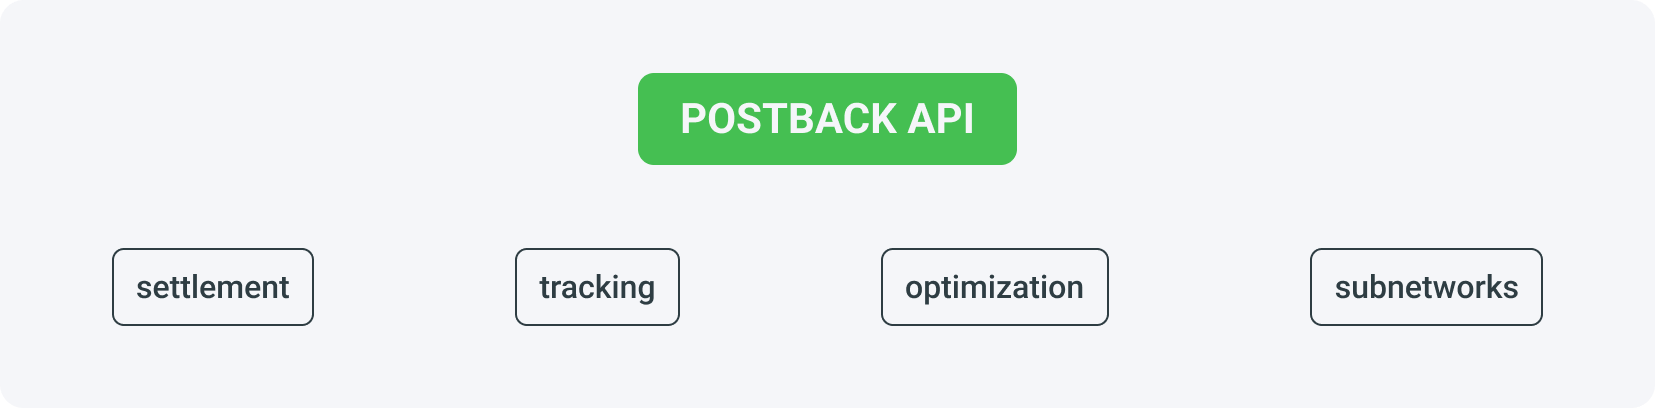 Postback in affiliate marketing can be used for settlement with partners, tracking, optimization and connecting sub-affiliate networks.